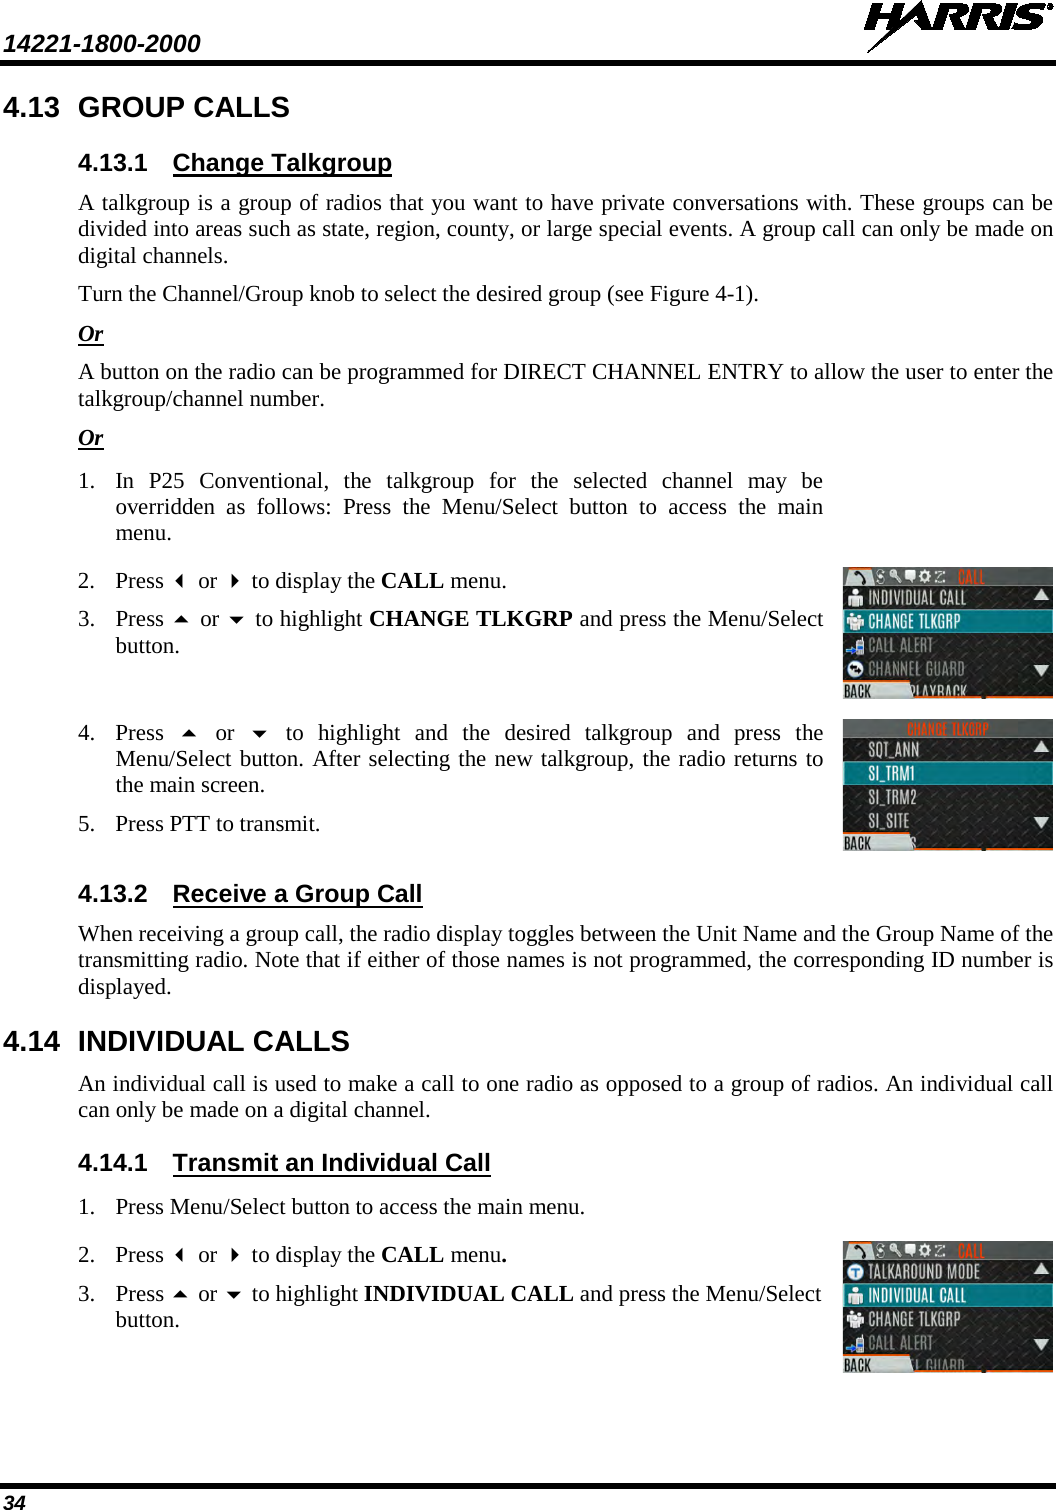 14221-1800-2000   34 4.13 GROUP CALLS 4.13.1 Change Talkgroup A talkgroup is a group of radios that you want to have private conversations with. These groups can be divided into areas such as state, region, county, or large special events. A group call can only be made on digital channels.  Turn the Channel/Group knob to select the desired group (see Figure 4-1). Or A button on the radio can be programmed for DIRECT CHANNEL ENTRY to allow the user to enter the talkgroup/channel number. Or 1. In P25 Conventional, the talkgroup for the selected channel may be overridden as follows: Press the Menu/Select button to access the main menu.  2. Press  or  to display the CALL menu. 3. Press  or  to highlight CHANGE TLKGRP and press the Menu/Select button.  4. Press  or   to highlight and the desired talkgroup and press the Menu/Select button. After selecting the new talkgroup, the radio returns to the main screen. 5. Press PTT to transmit.   4.13.2 Receive a Group Call When receiving a group call, the radio display toggles between the Unit Name and the Group Name of the transmitting radio. Note that if either of those names is not programmed, the corresponding ID number is displayed. 4.14 INDIVIDUAL CALLS An individual call is used to make a call to one radio as opposed to a group of radios. An individual call can only be made on a digital channel.  4.14.1 Transmit an Individual Call 1. Press Menu/Select button to access the main menu.  2. Press  or  to display the CALL menu. 3. Press  or  to highlight INDIVIDUAL CALL and press the Menu/Select button.  